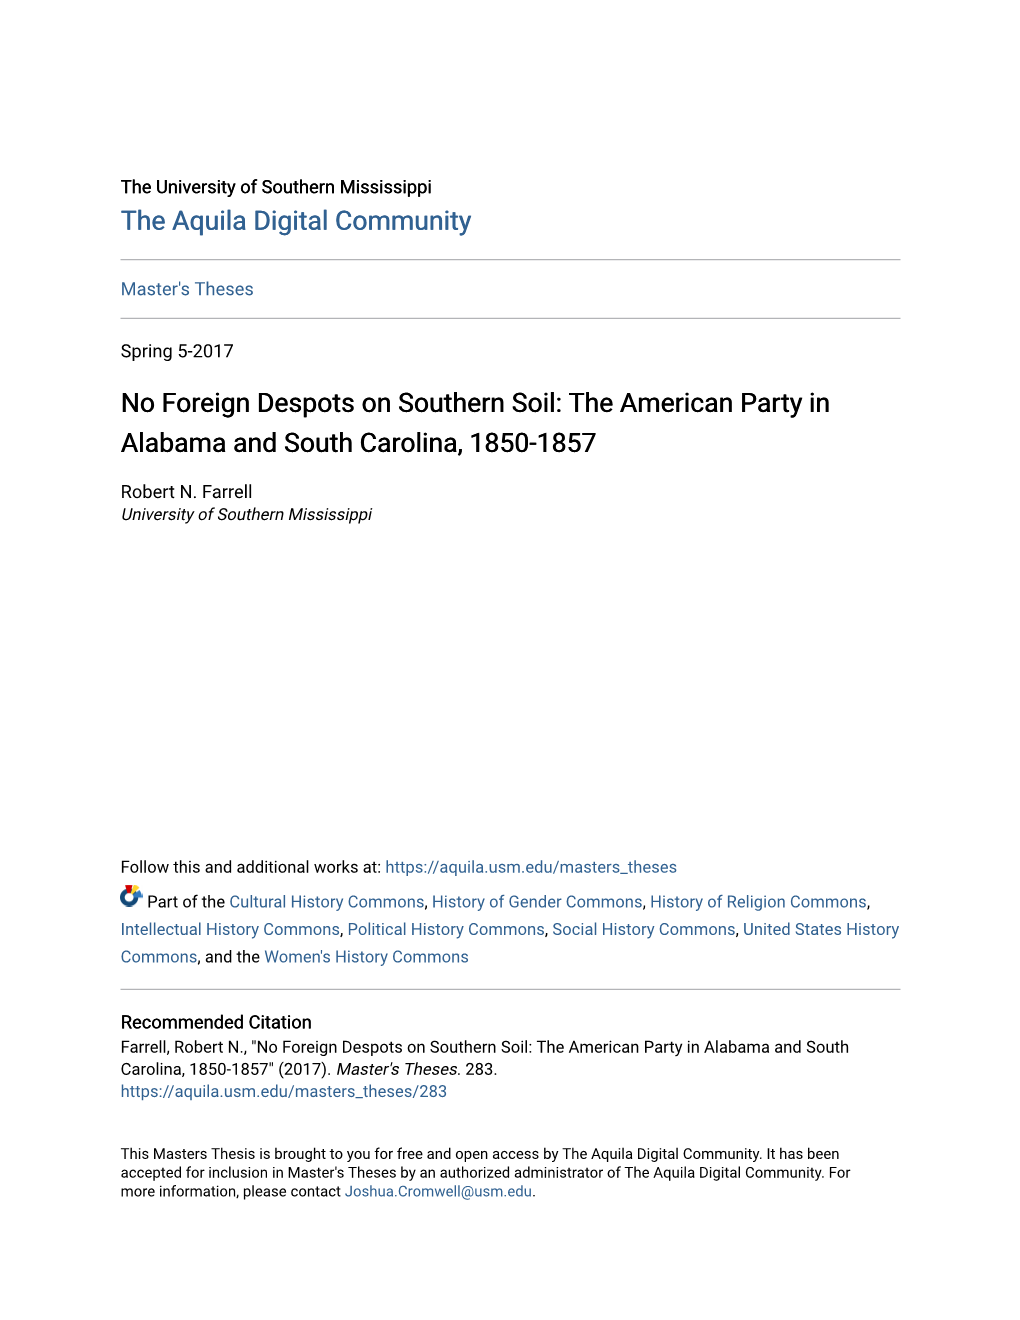 No Foreign Despots on Southern Soil: the American Party in Alabama and South Carolina, 1850-1857